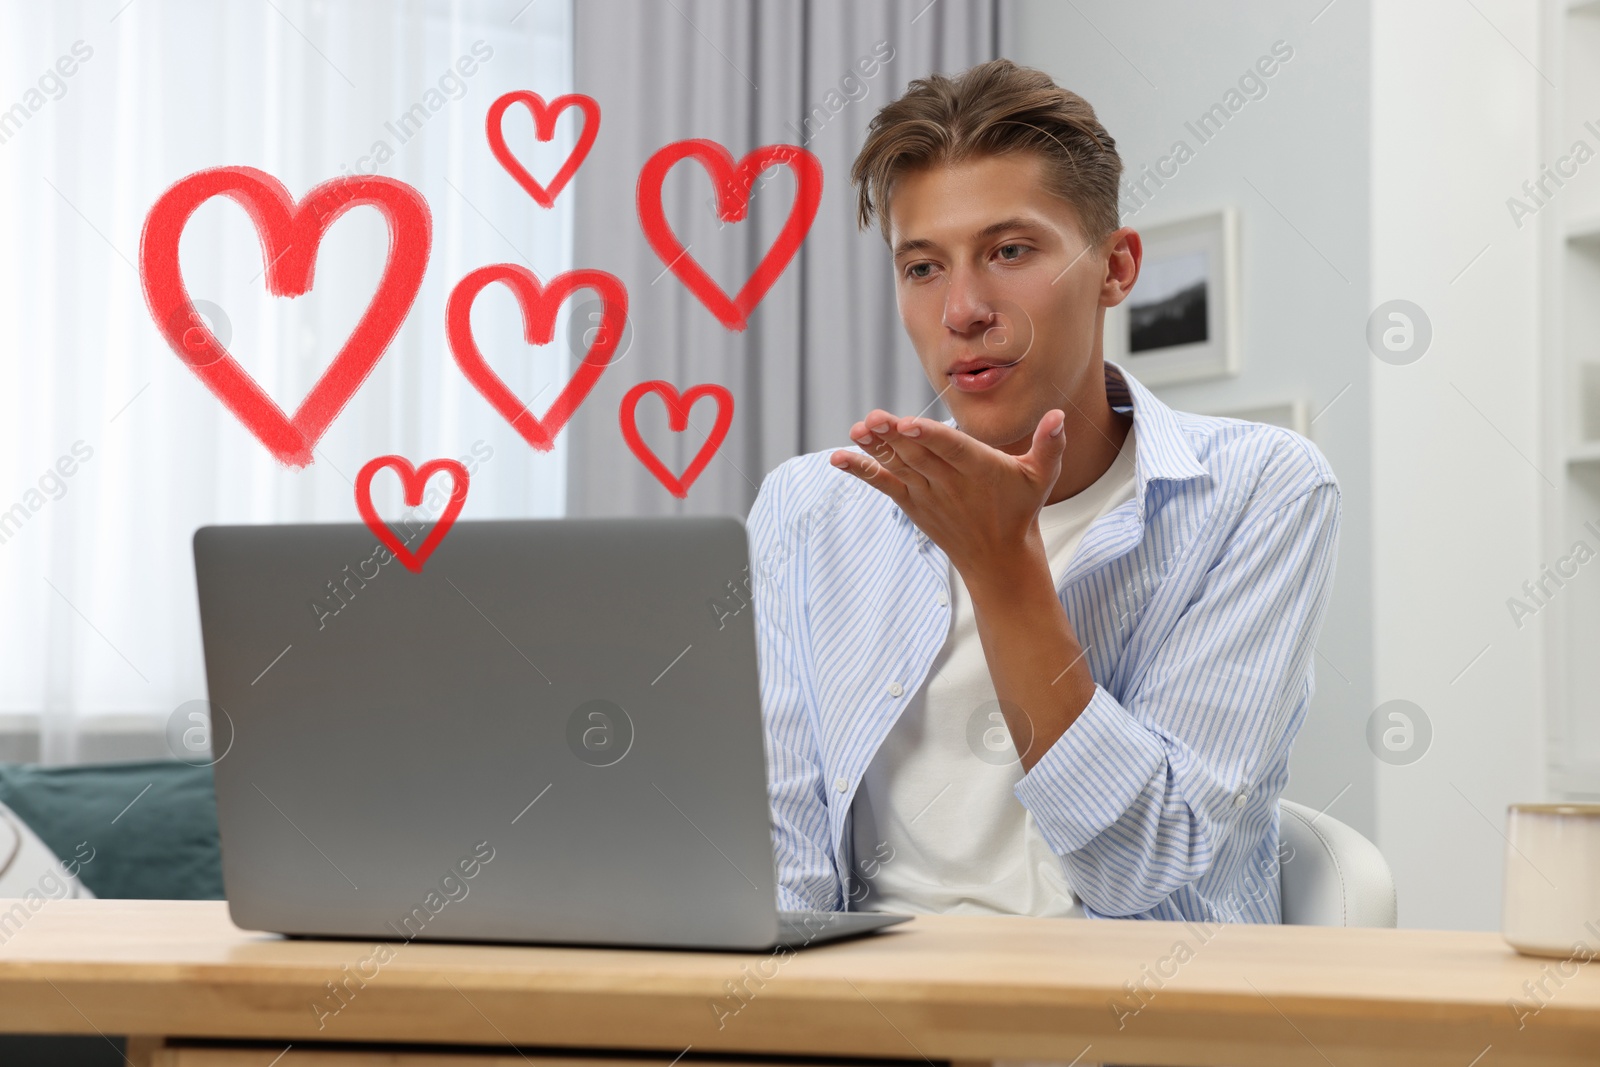 Image of Long distance relationship. Young man sending air kiss to his loved one via video chat indoors. Red hearts near him